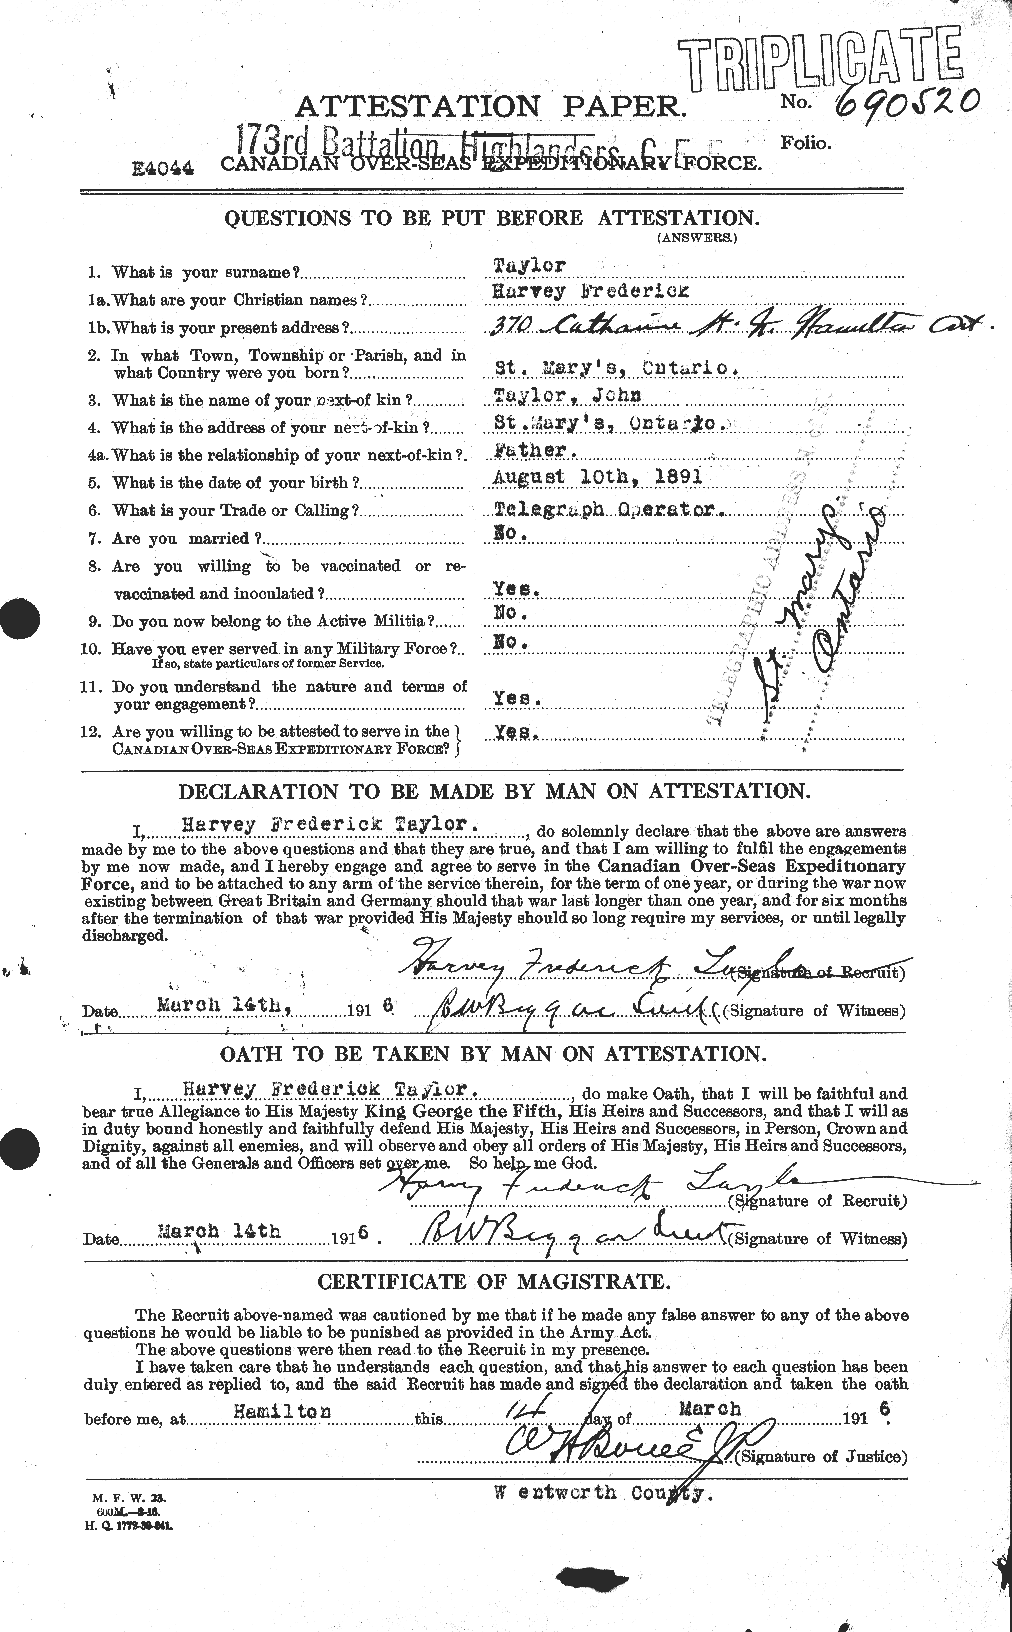 Personnel Records of the First World War - CEF 626510a